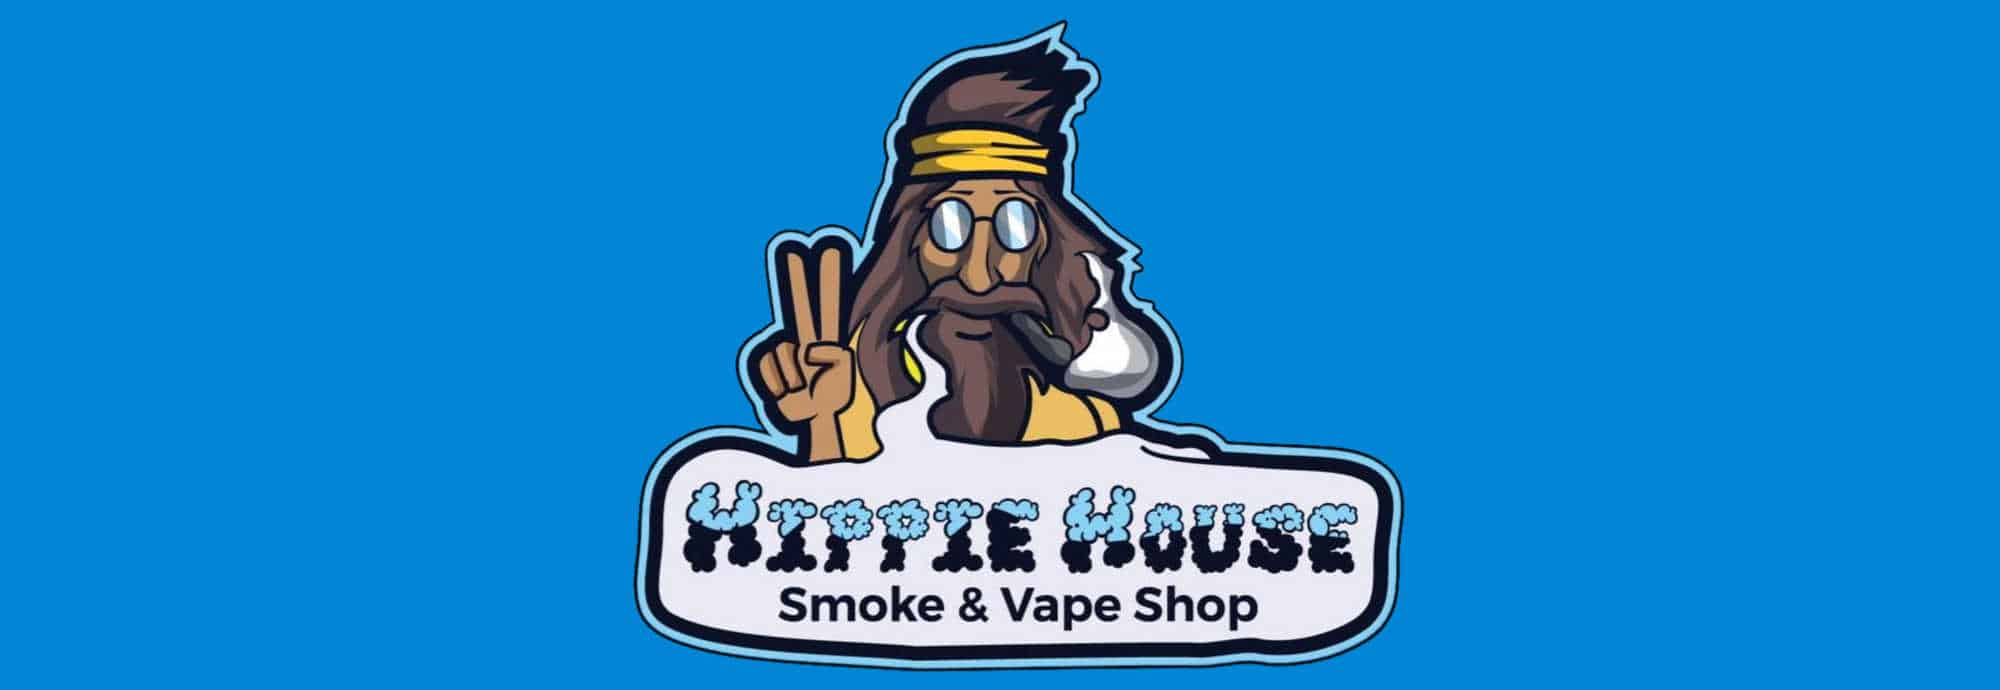 image of hippie house smoke and vape shop in ohio canton